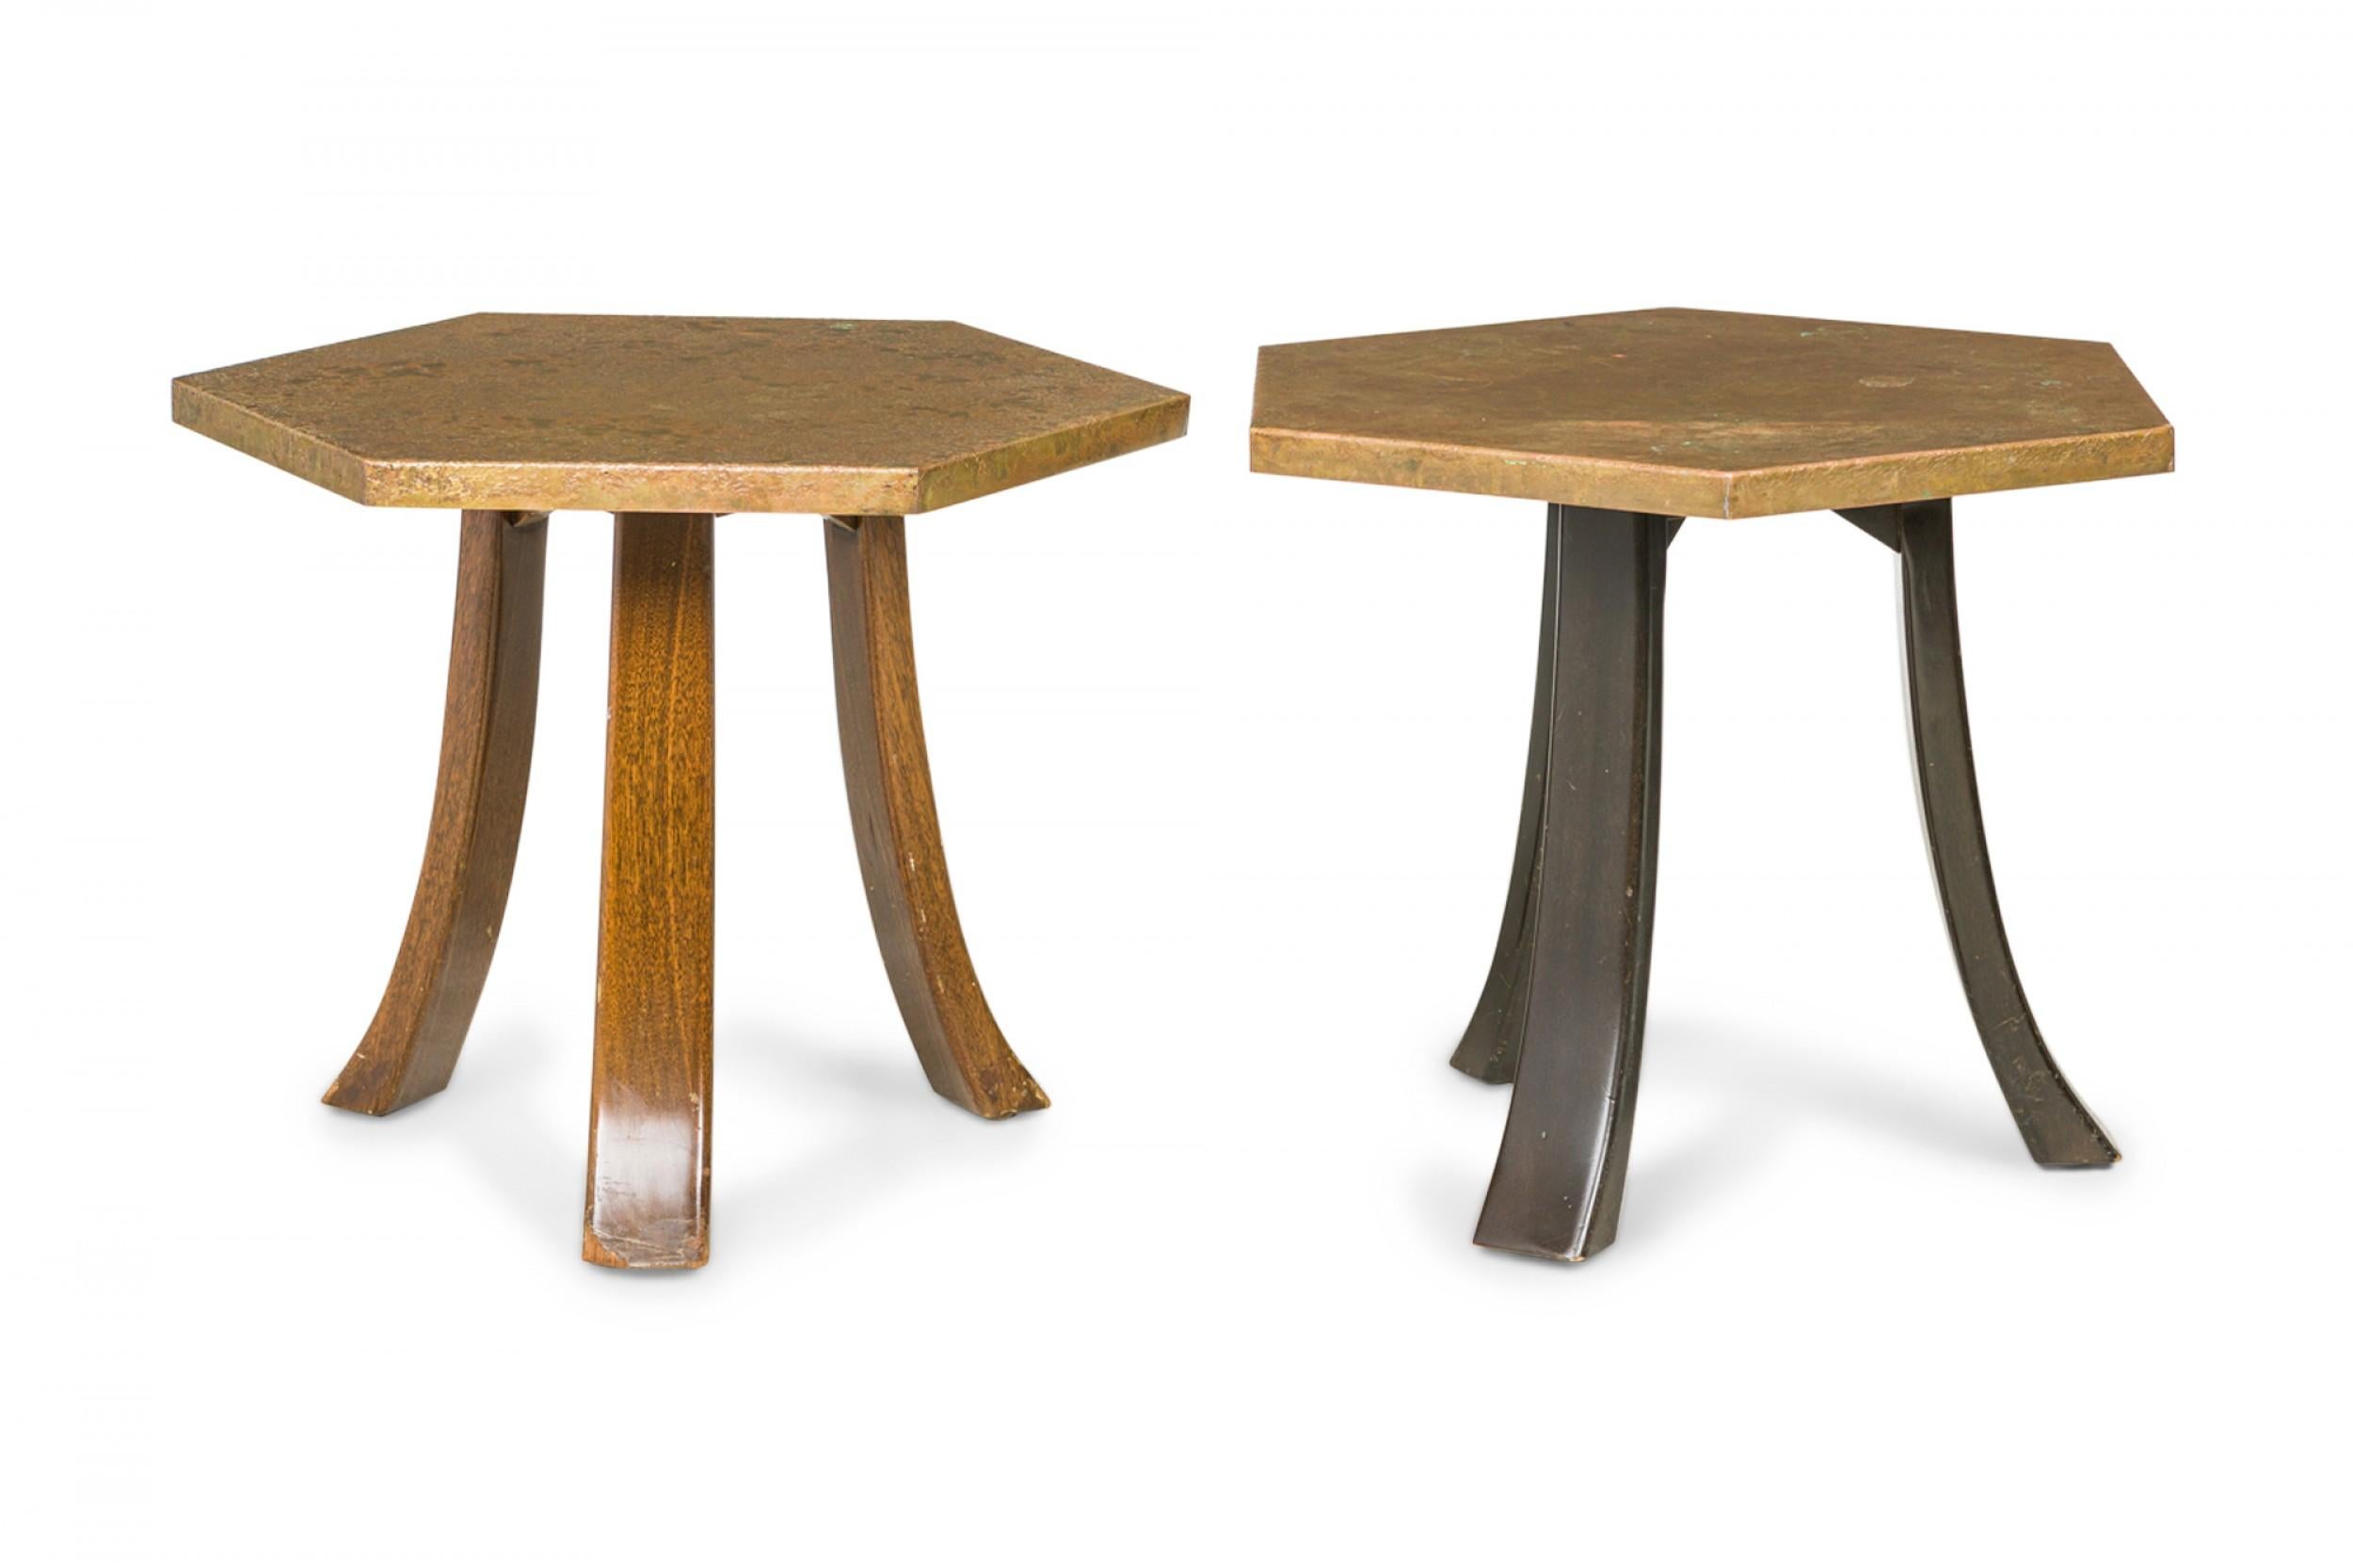 7 American Mid-Century end / side tables with hexagonal acid etched bronze tops supported on three curved wooden legs. (HARVEY PROBBER)(PRICED EACH)(Similar tables: DUF0356B-E)
